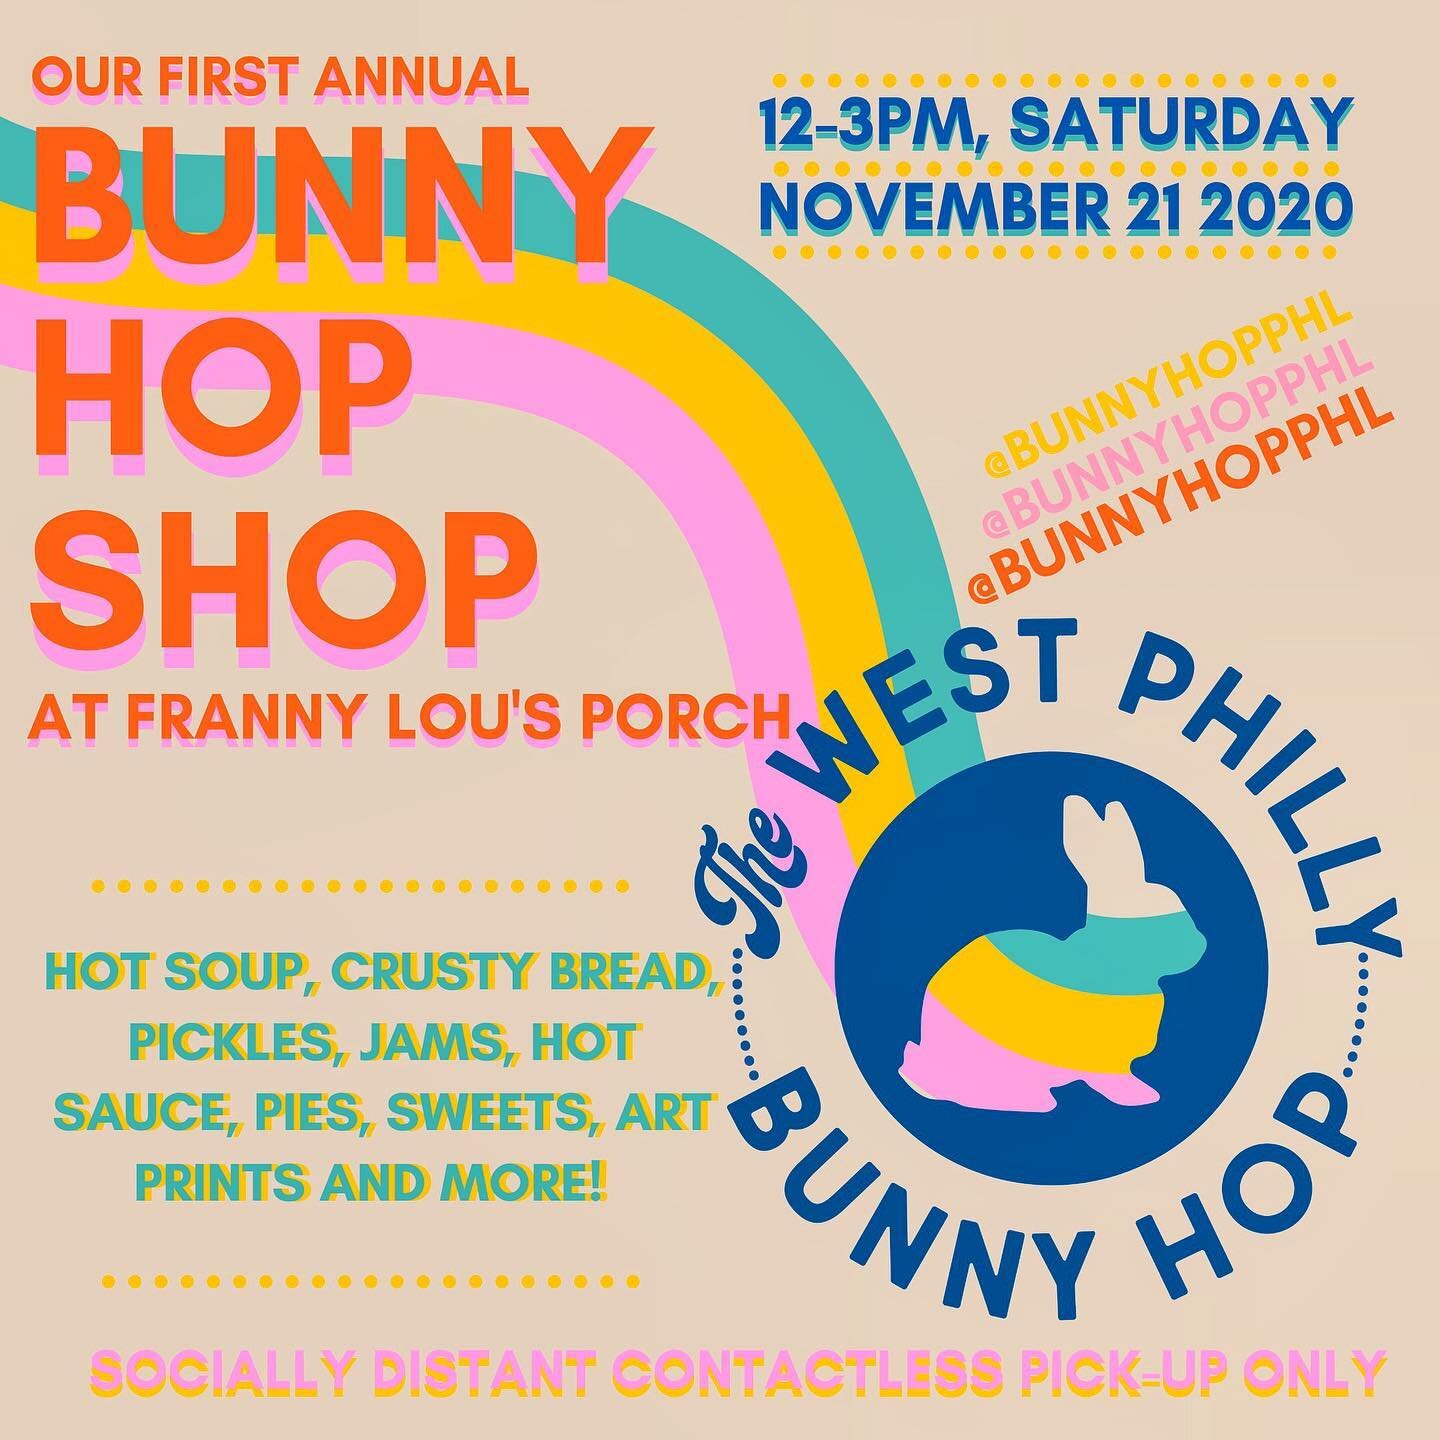 Come out next Saturday to @frannylous for our first #bunnyhopshop! Our bunnies are busy preparing lots of treats for you to stock up on for the holidays. Each purchase will help support our work🐰💕🐰 socially distant contactless pick-up only. See ya